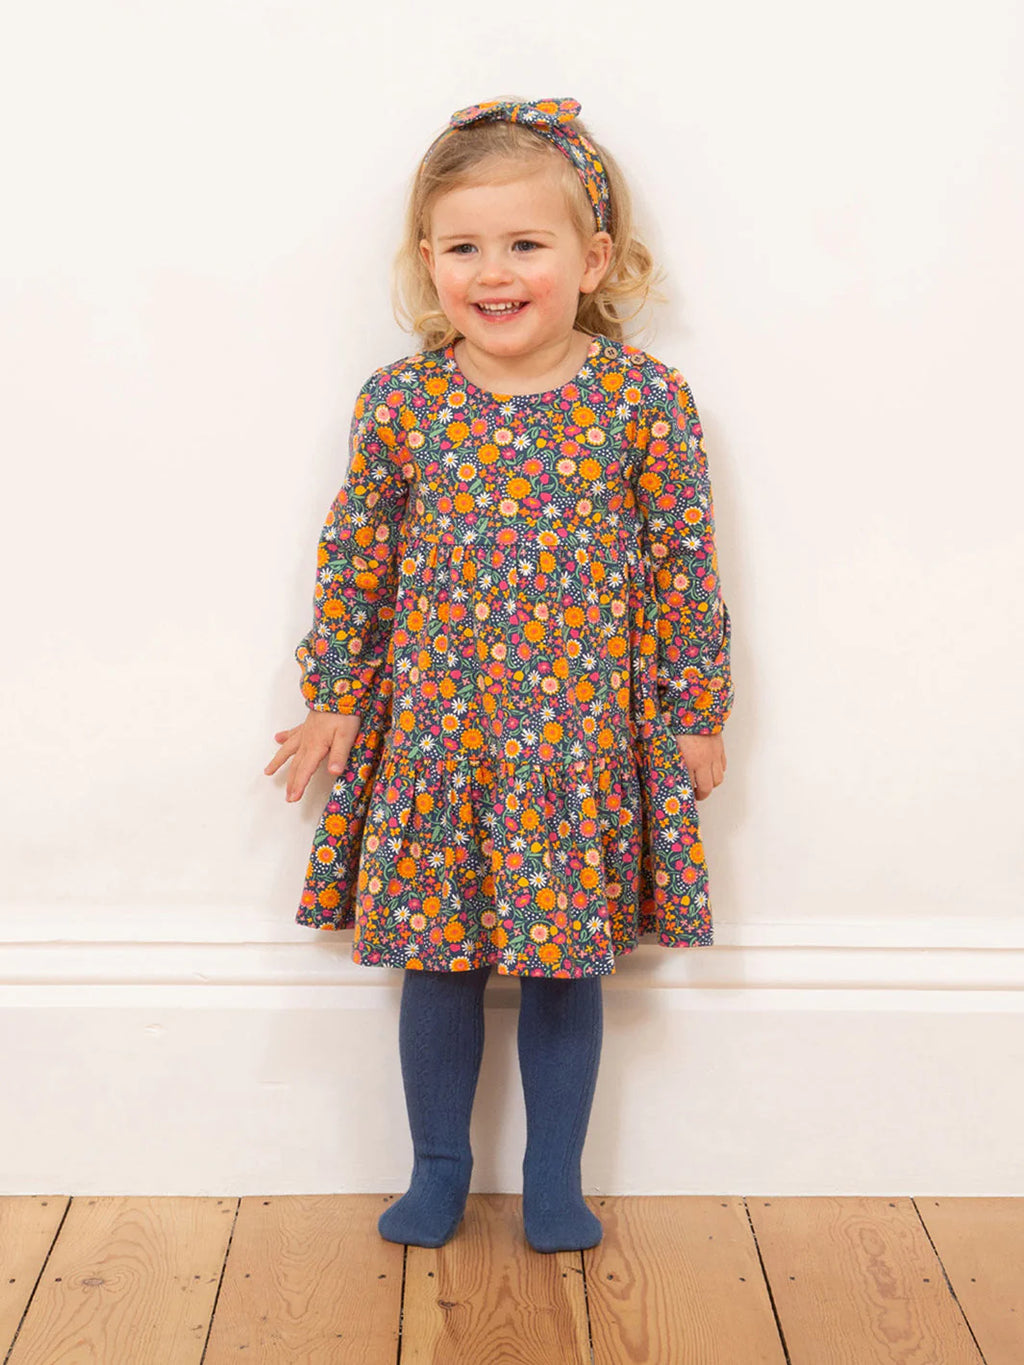 Kite Clothing Girls Love Ditsy Print Navy & Pink Floral Dress | 50% OFF